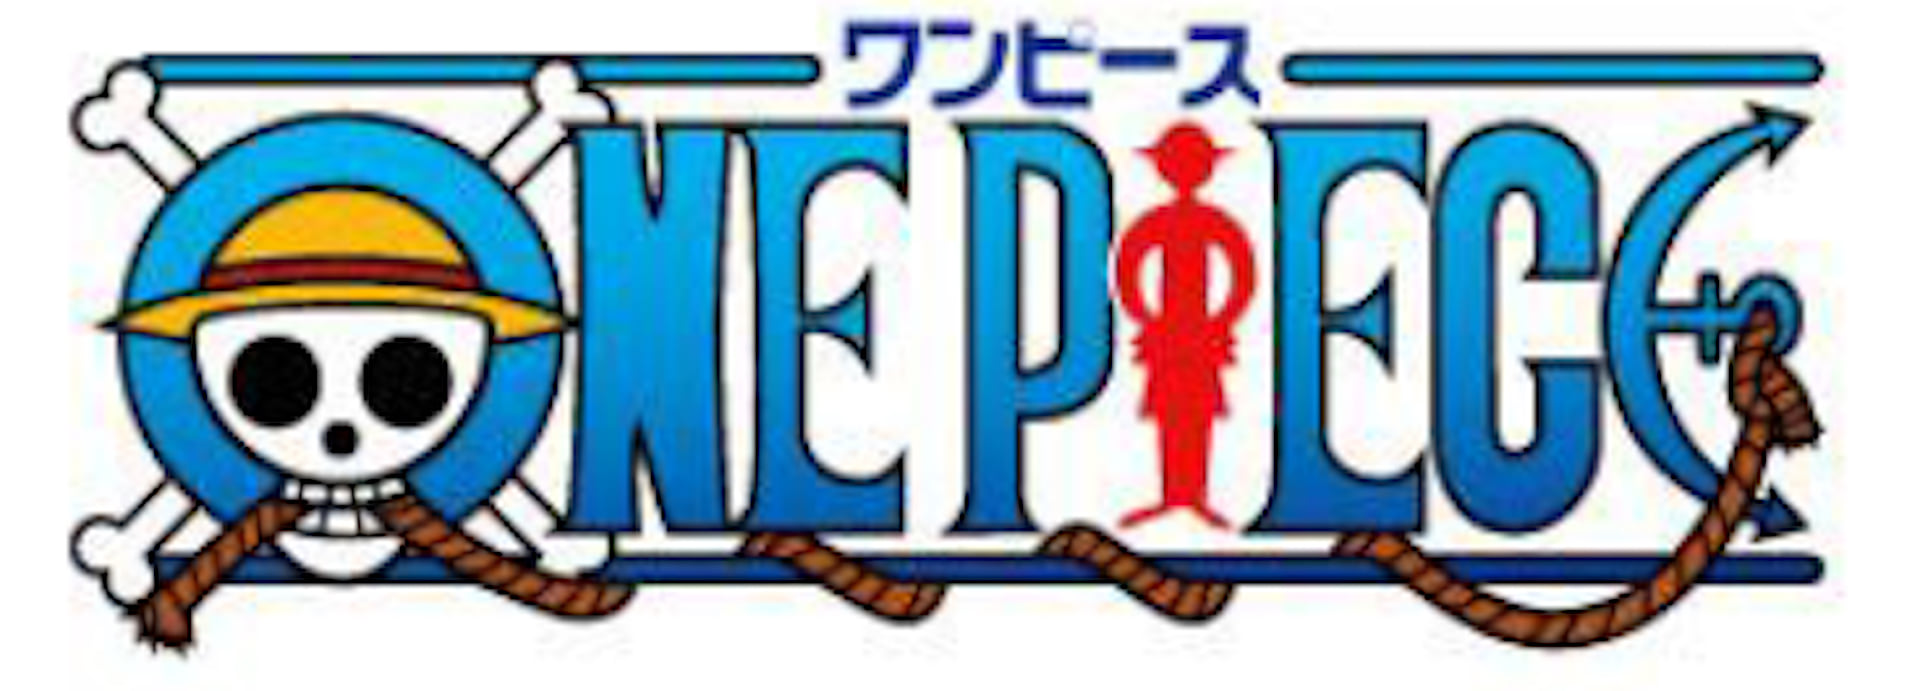 『ONE PIECE STAMPEDE』公開を前に“あの名場面をもう一度”『ワンピース』FODにて1～130話が無料配信｜放送開始20周年記念 video190708onepiece-fod_3-1920x691